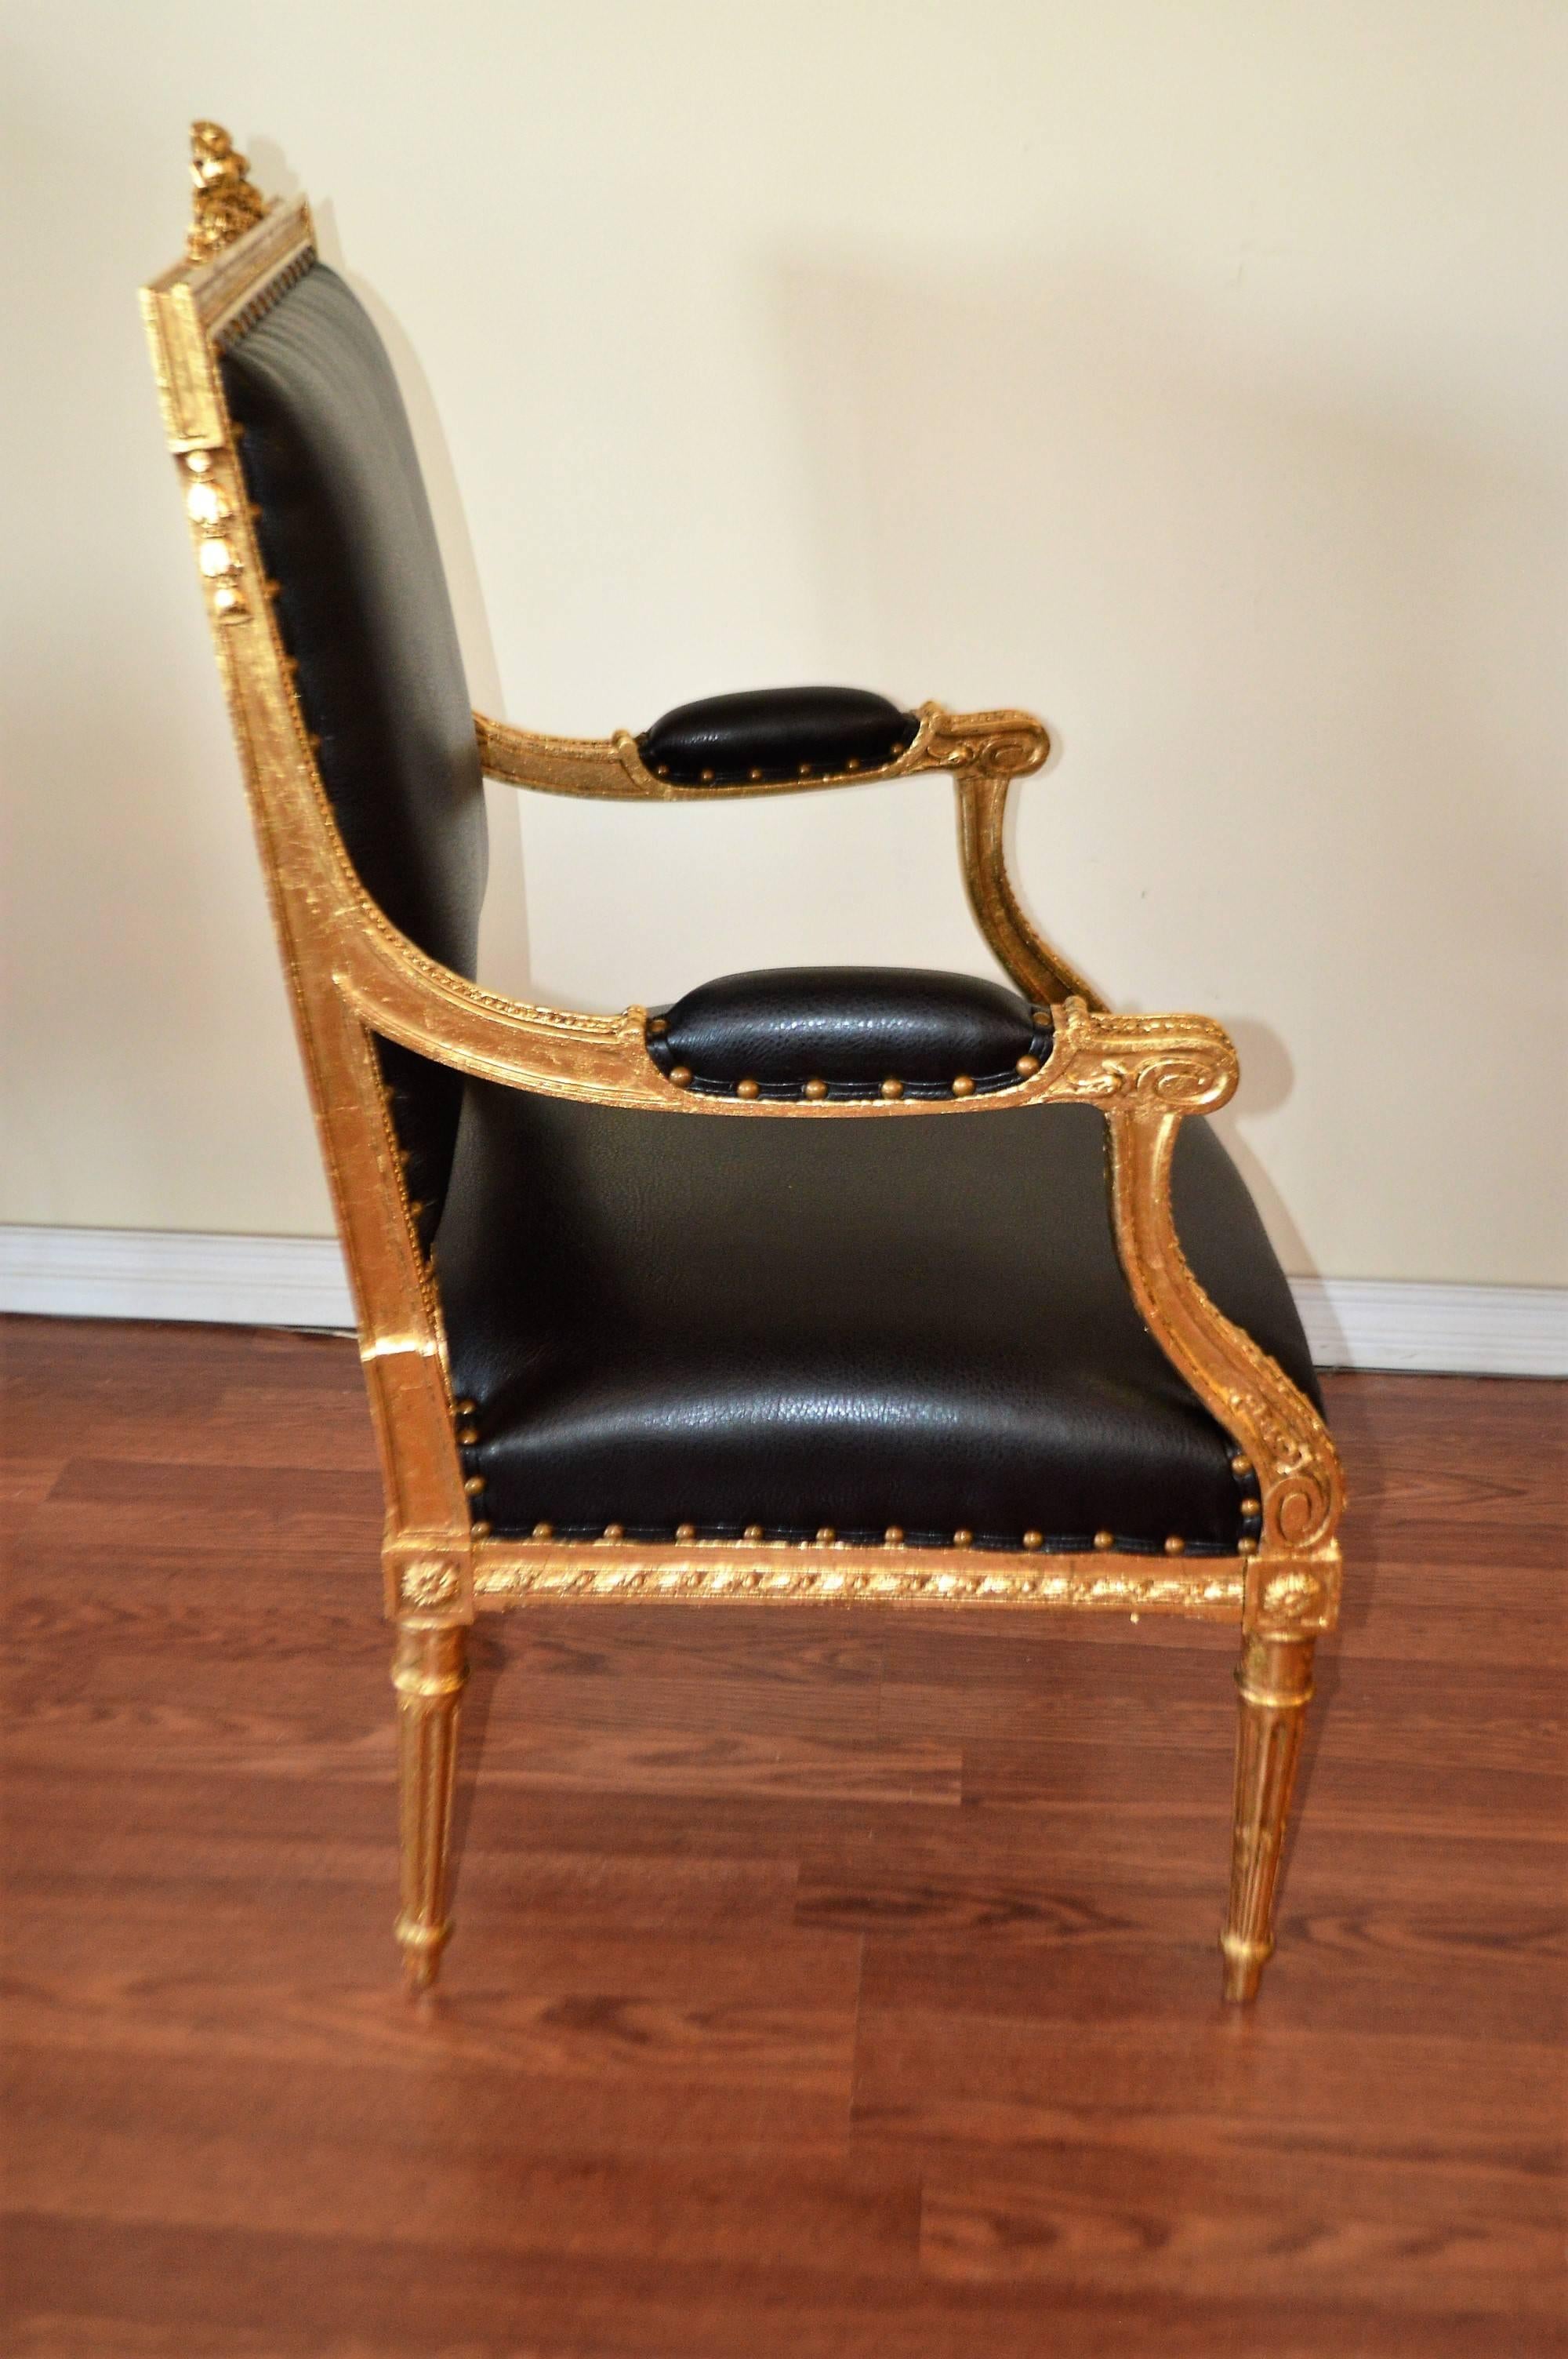 20th Century Pair of Louis XVI Style Gilded Armchairs Newly Upholstered in Black Faux Leather